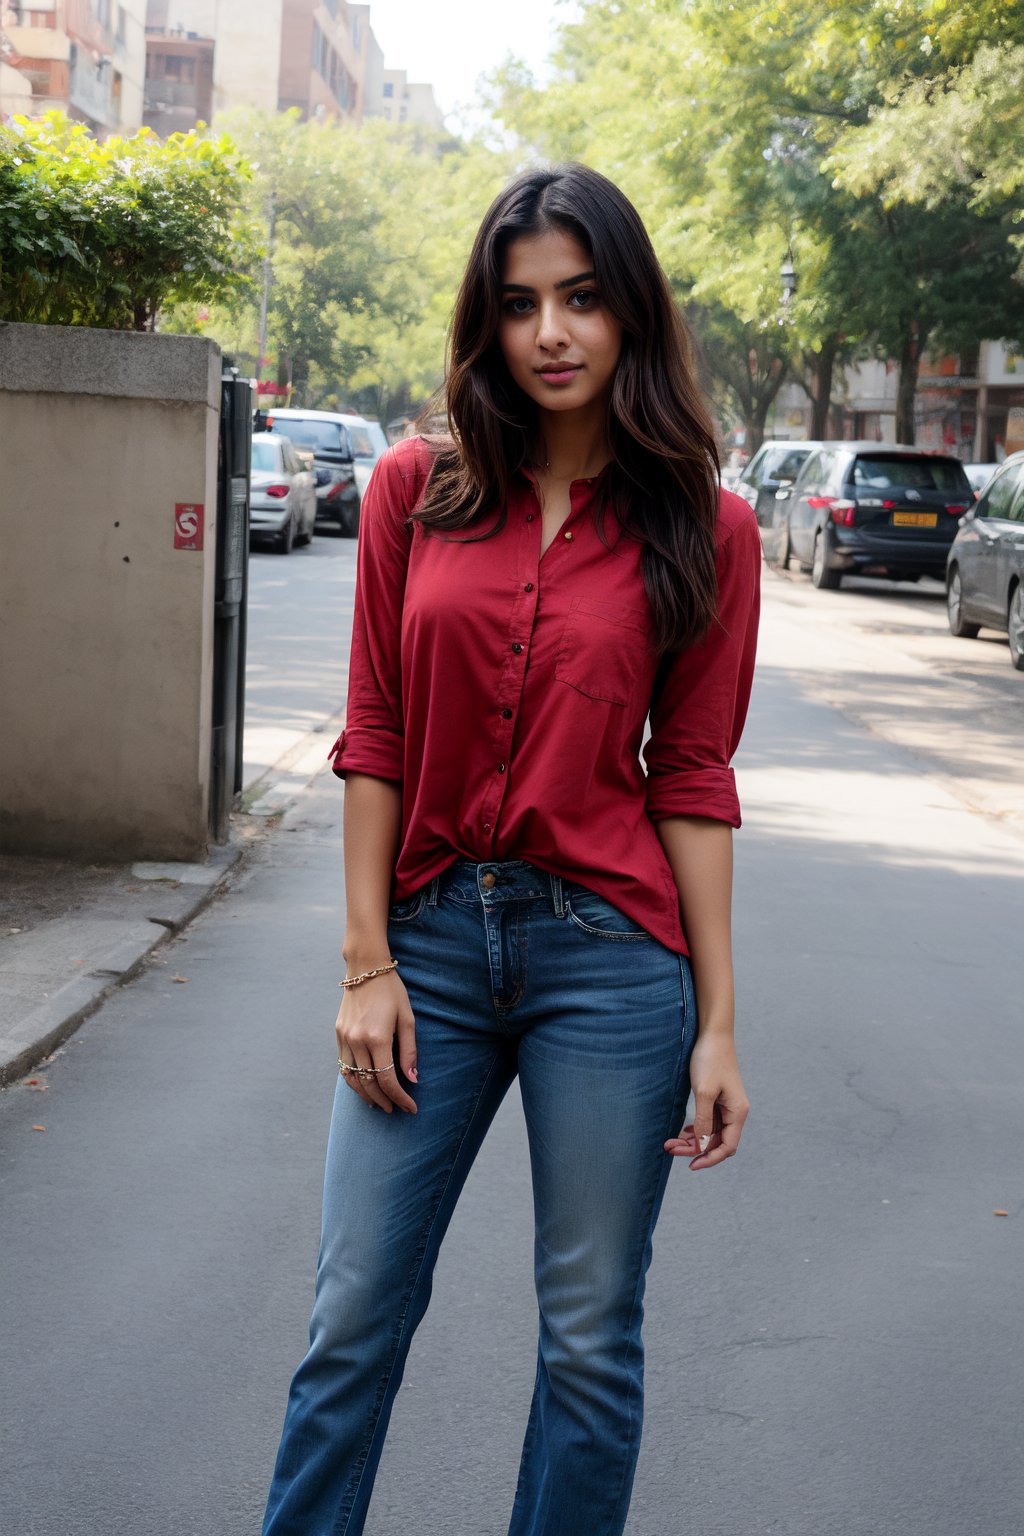 There a girl isma young hot beautiful hsdan girl Wearing red Shirt and Jeans, hot looks face features like Kama Kaif, summer look Standing locking into the camera, portrait causal phets ResPurtrat